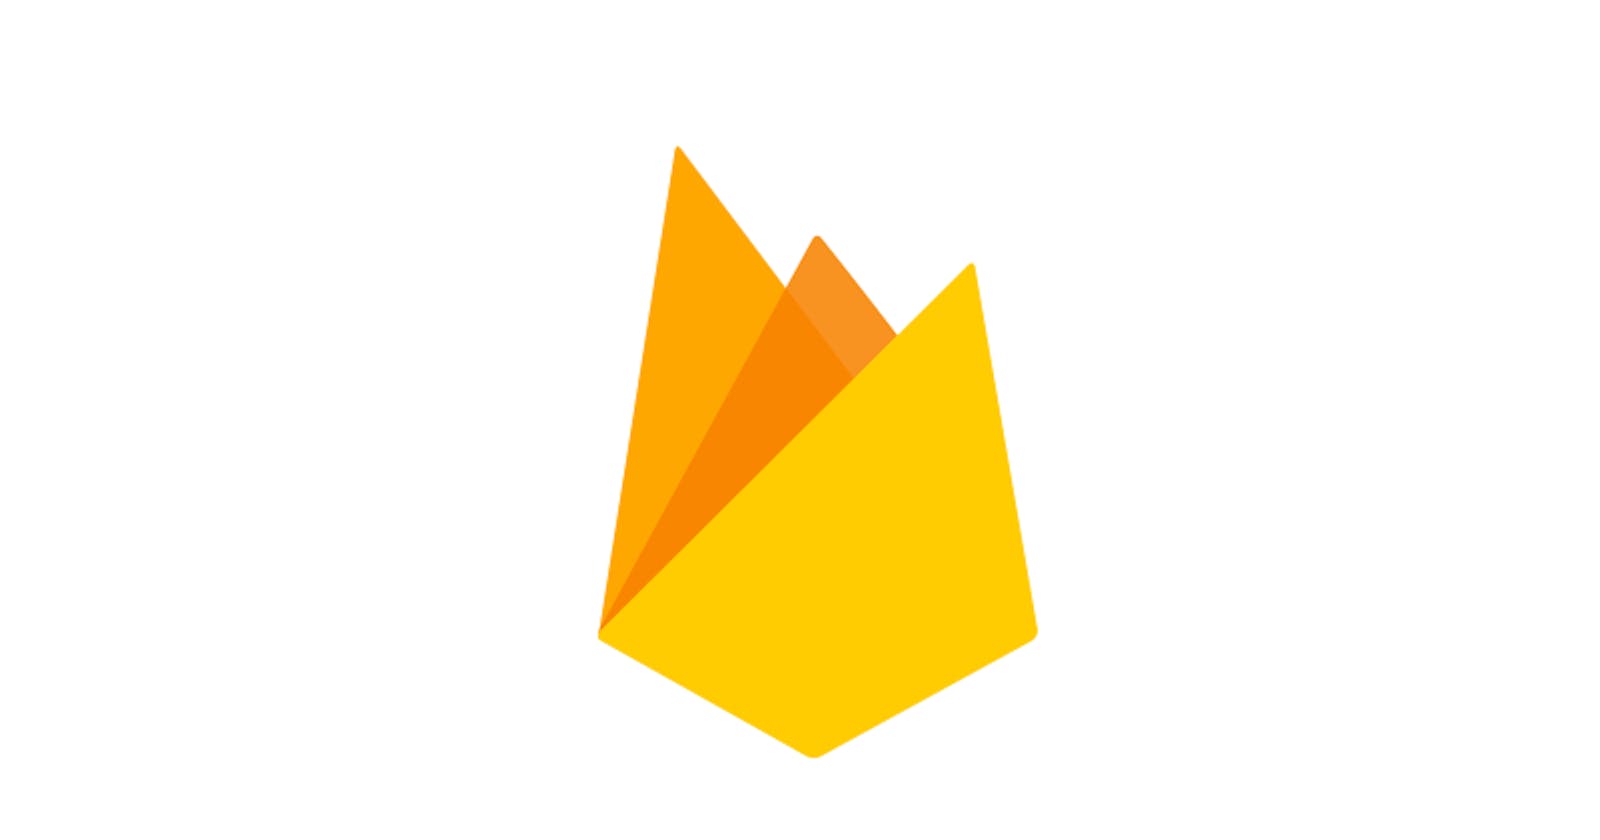 Adding Firebase to your web application.